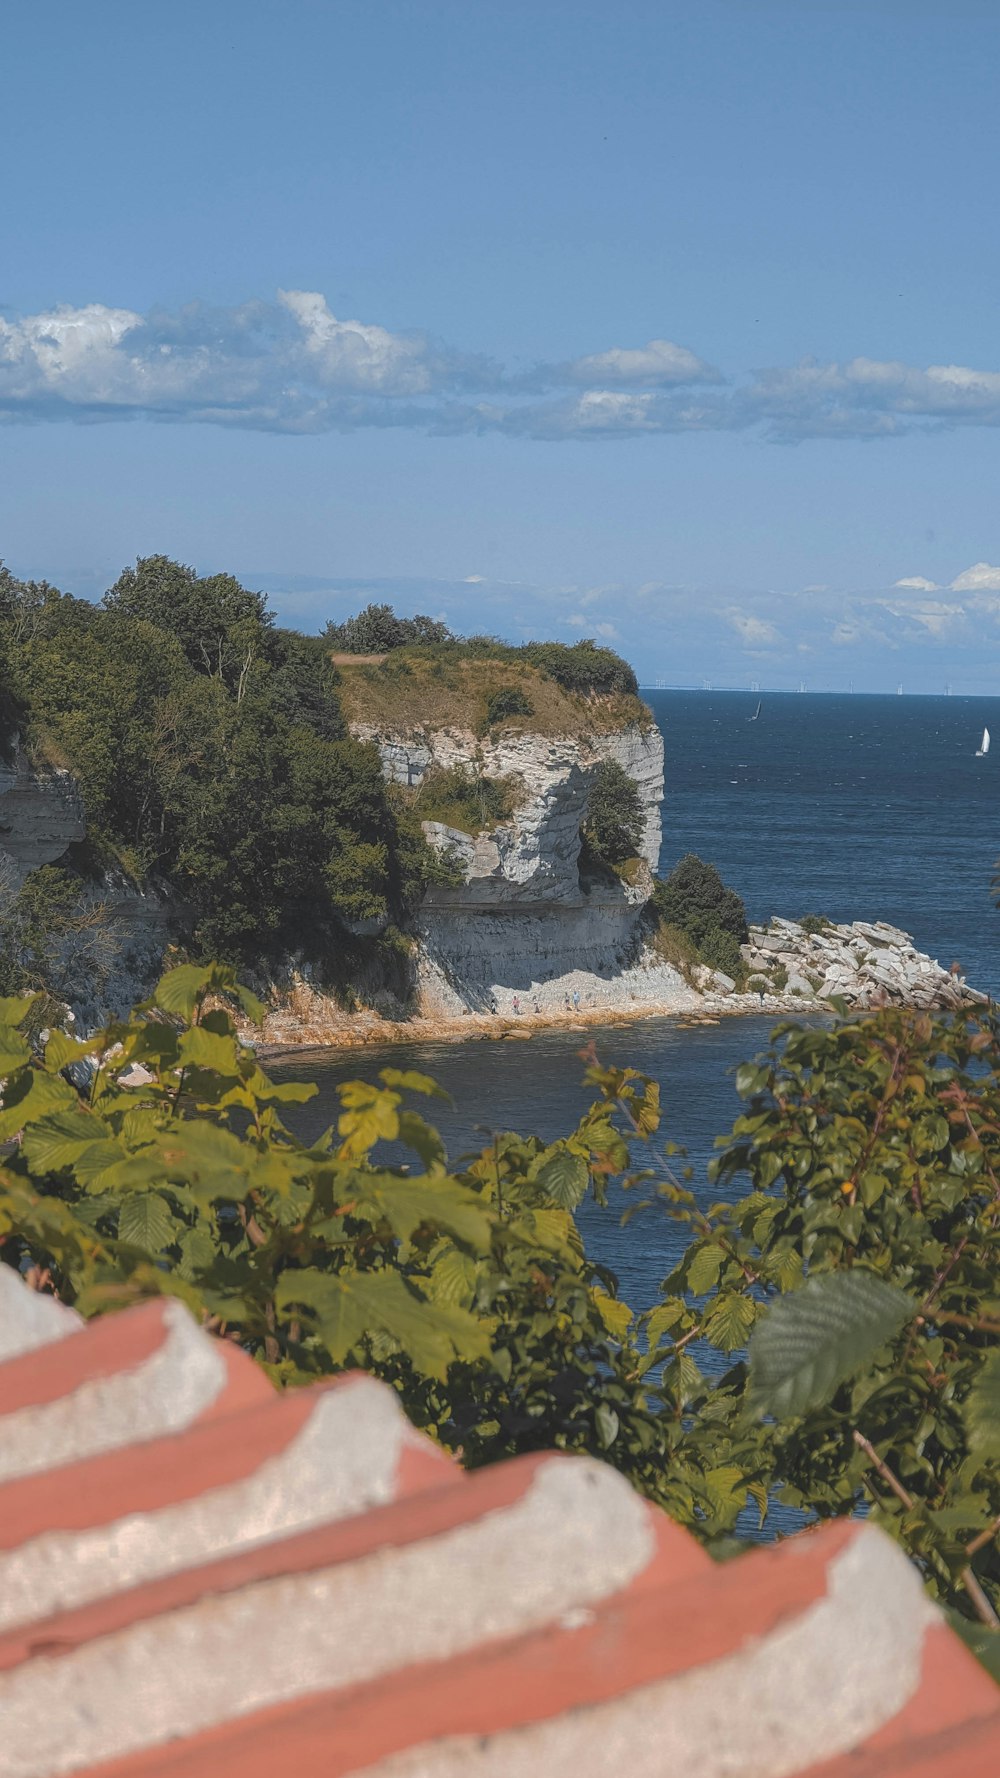 a rocky island with trees and a body of water in the background